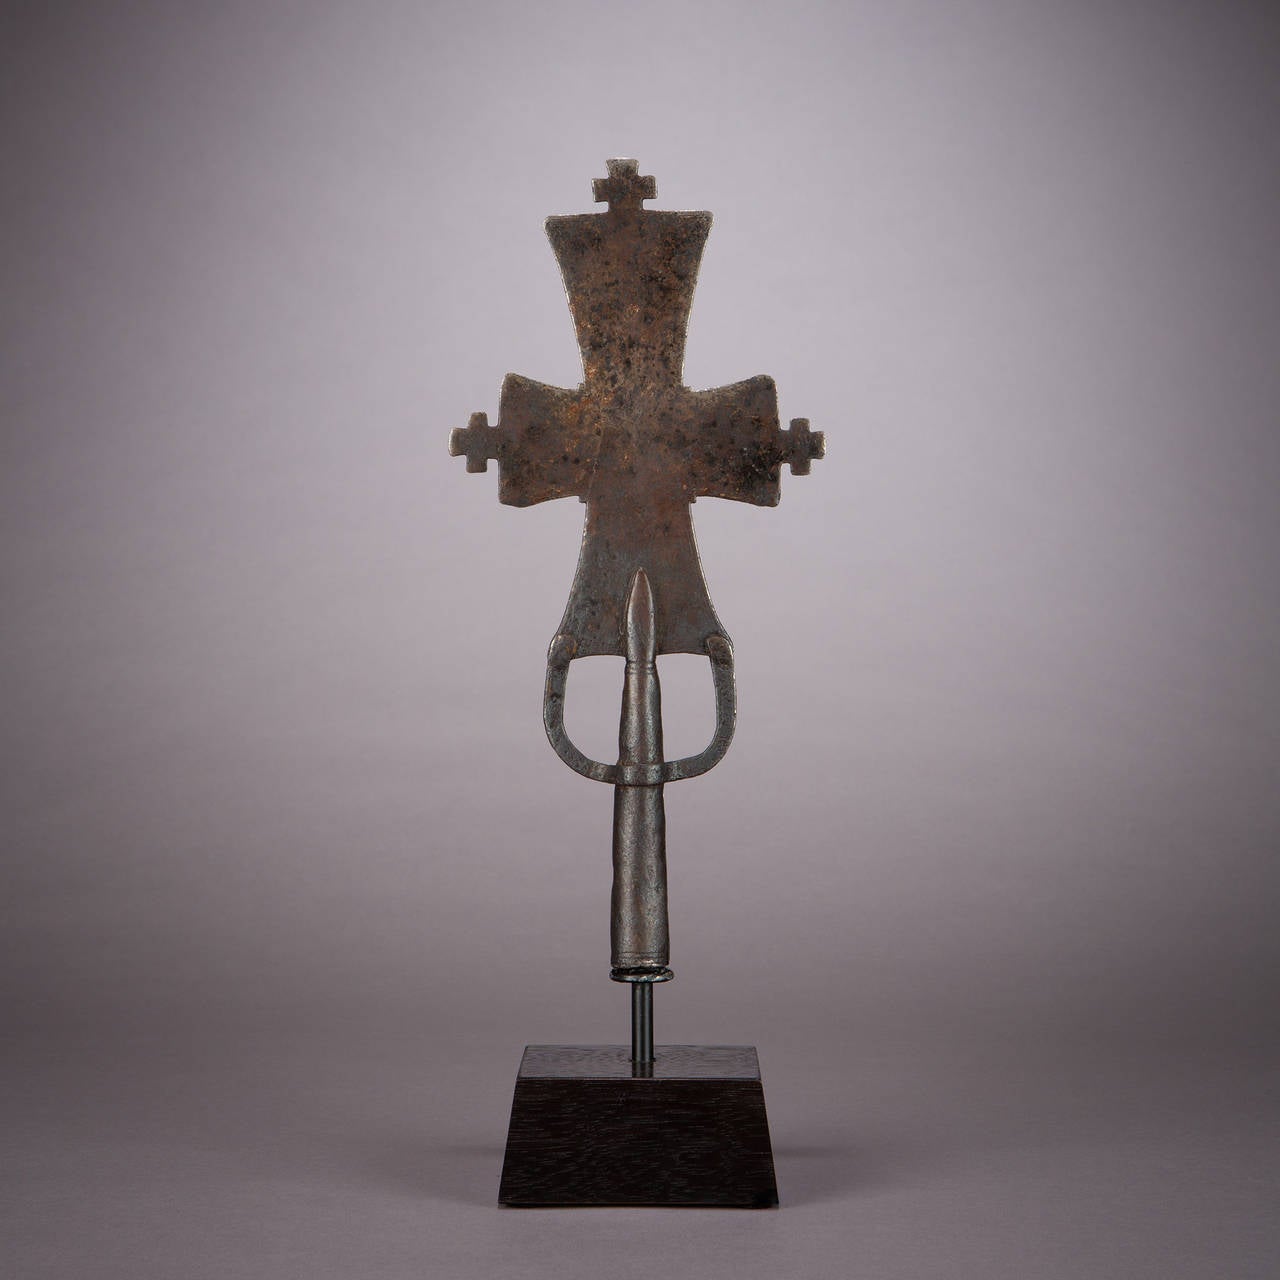 An iron processional hand cross, Northern Ethiopia, 15th-17th century.

Ethiopian hand crosses are coveted by collectors of medieval art, religious art and tribal art for their beauty and variety of forms.

Ethiopia was probably the second